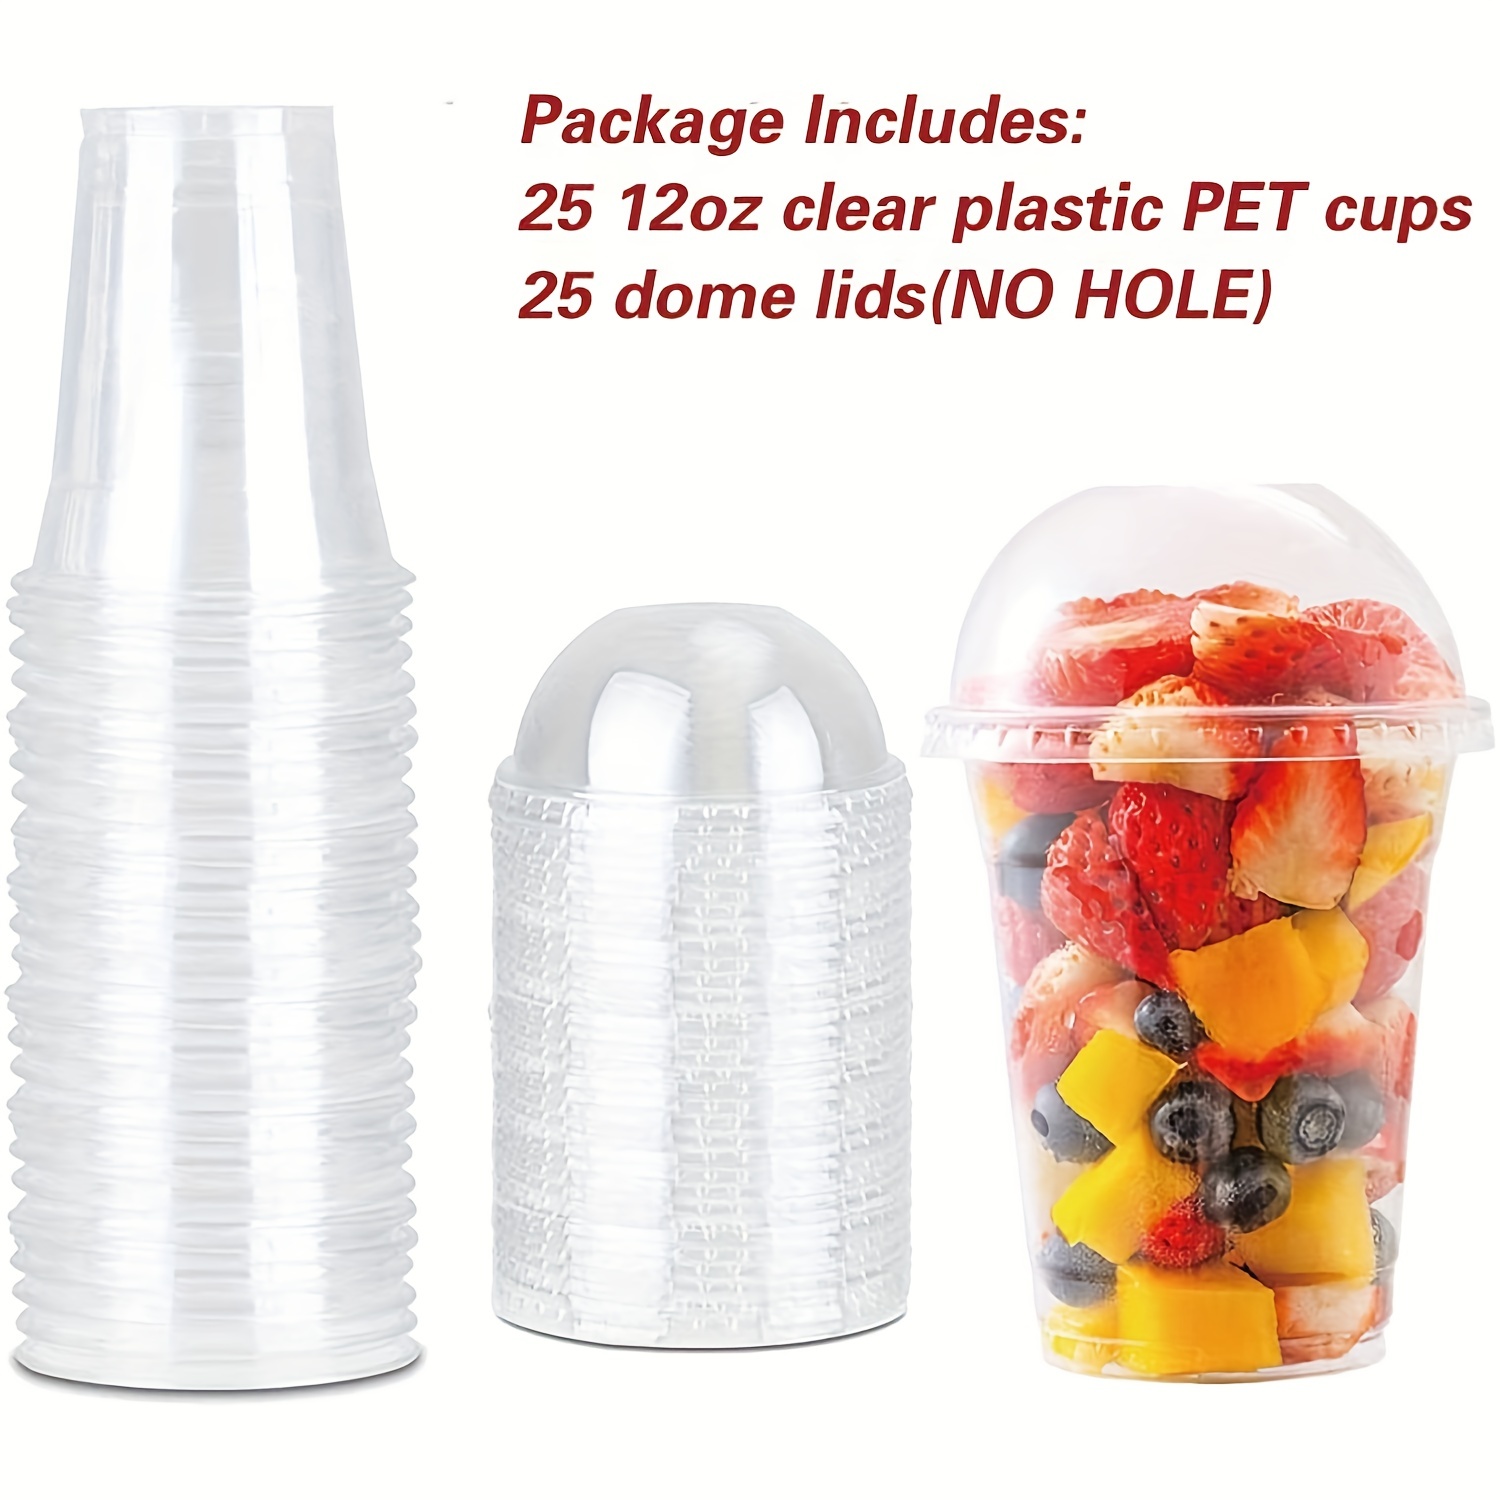 Yocup Company: Yocup 8-10 oz Clear Plastic Dome Lid With Hole For for PET  Cups (78mm) - 1 case (1000 piece)